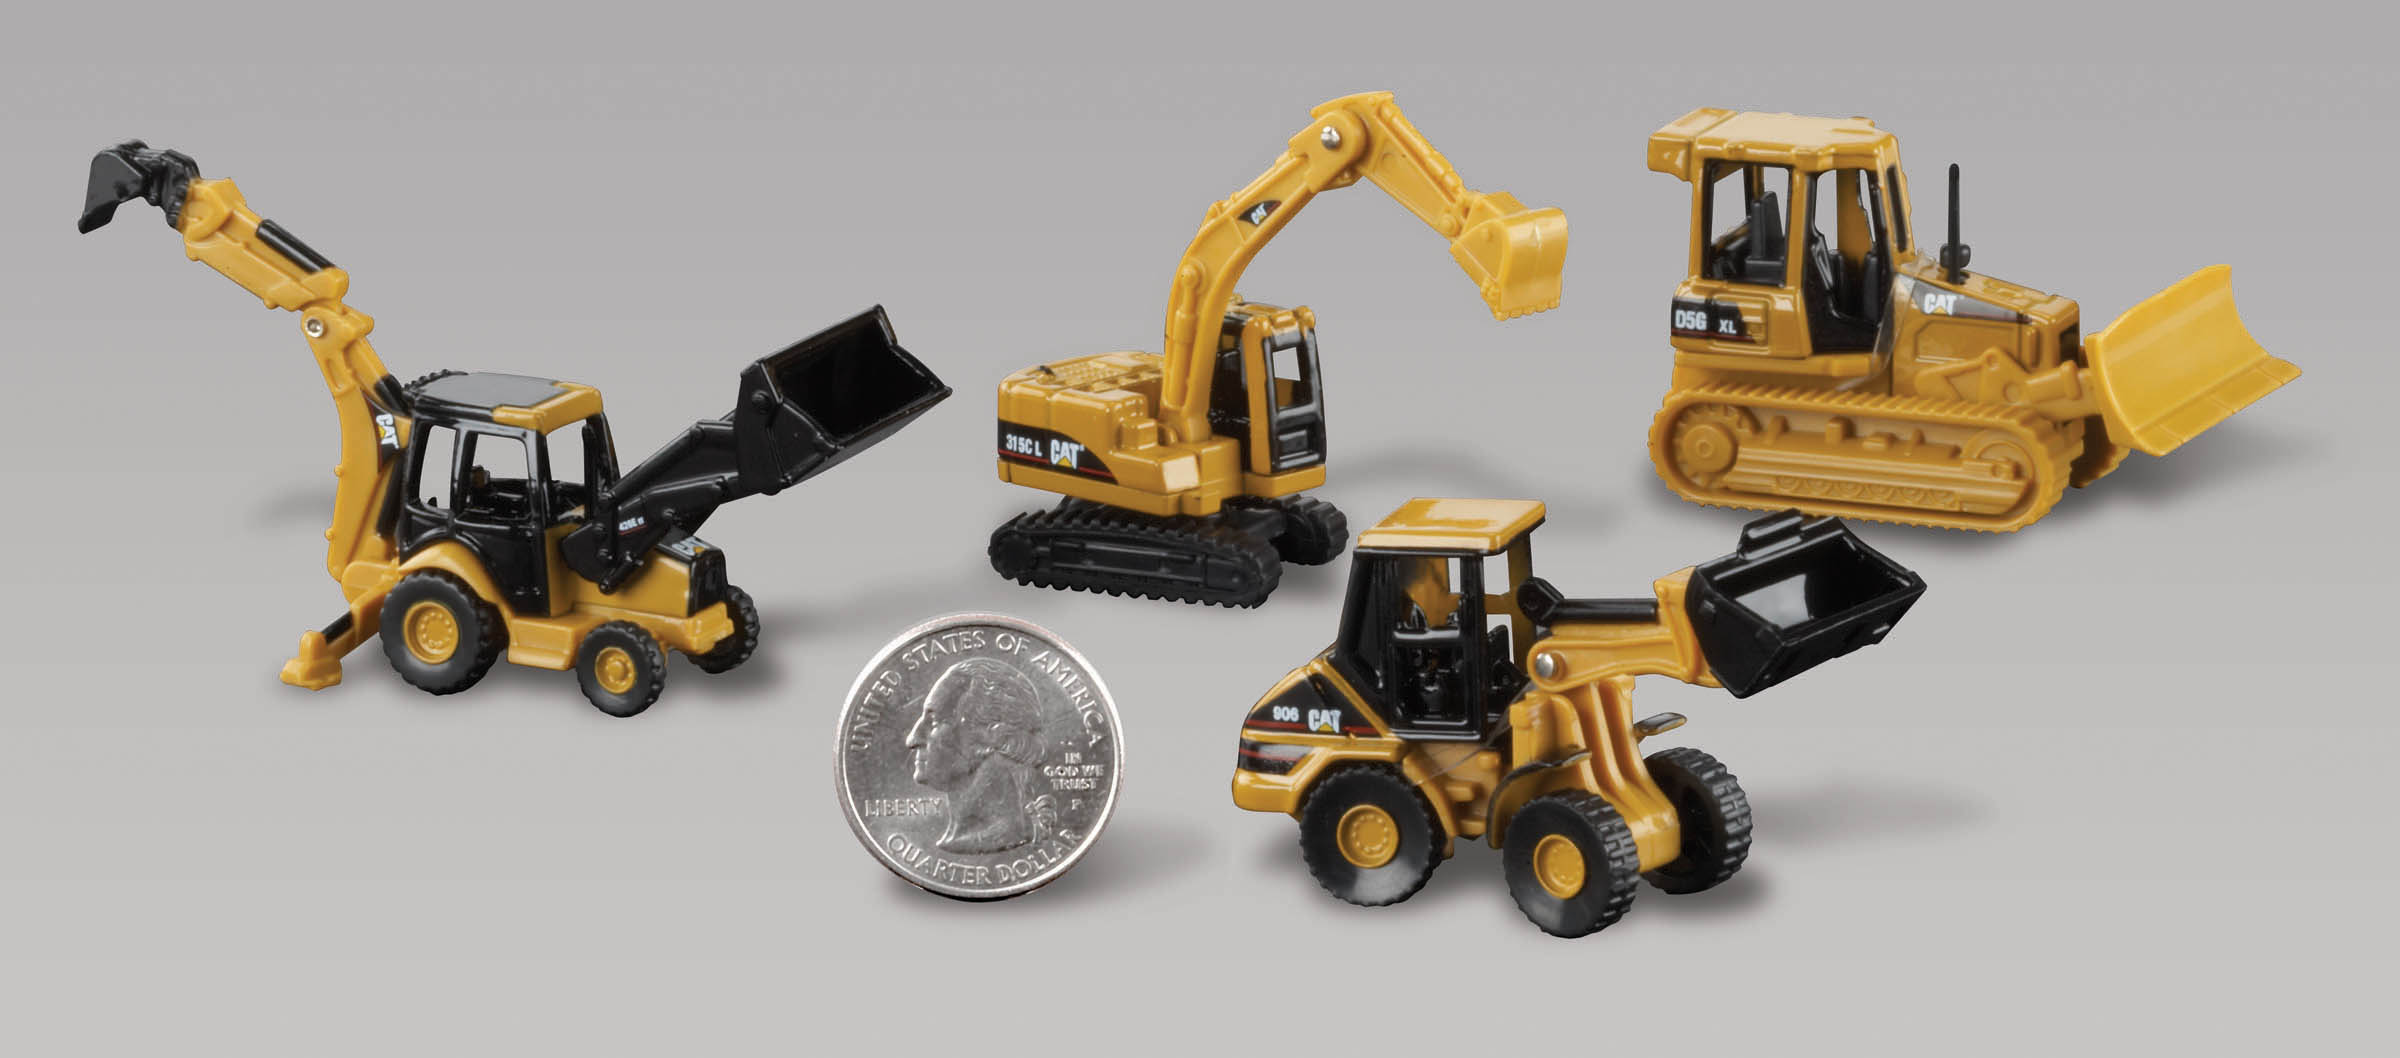 1/160 Scale Caterpillar CAT 315D L Hydraulic Excavator by Diecast Masters 85556